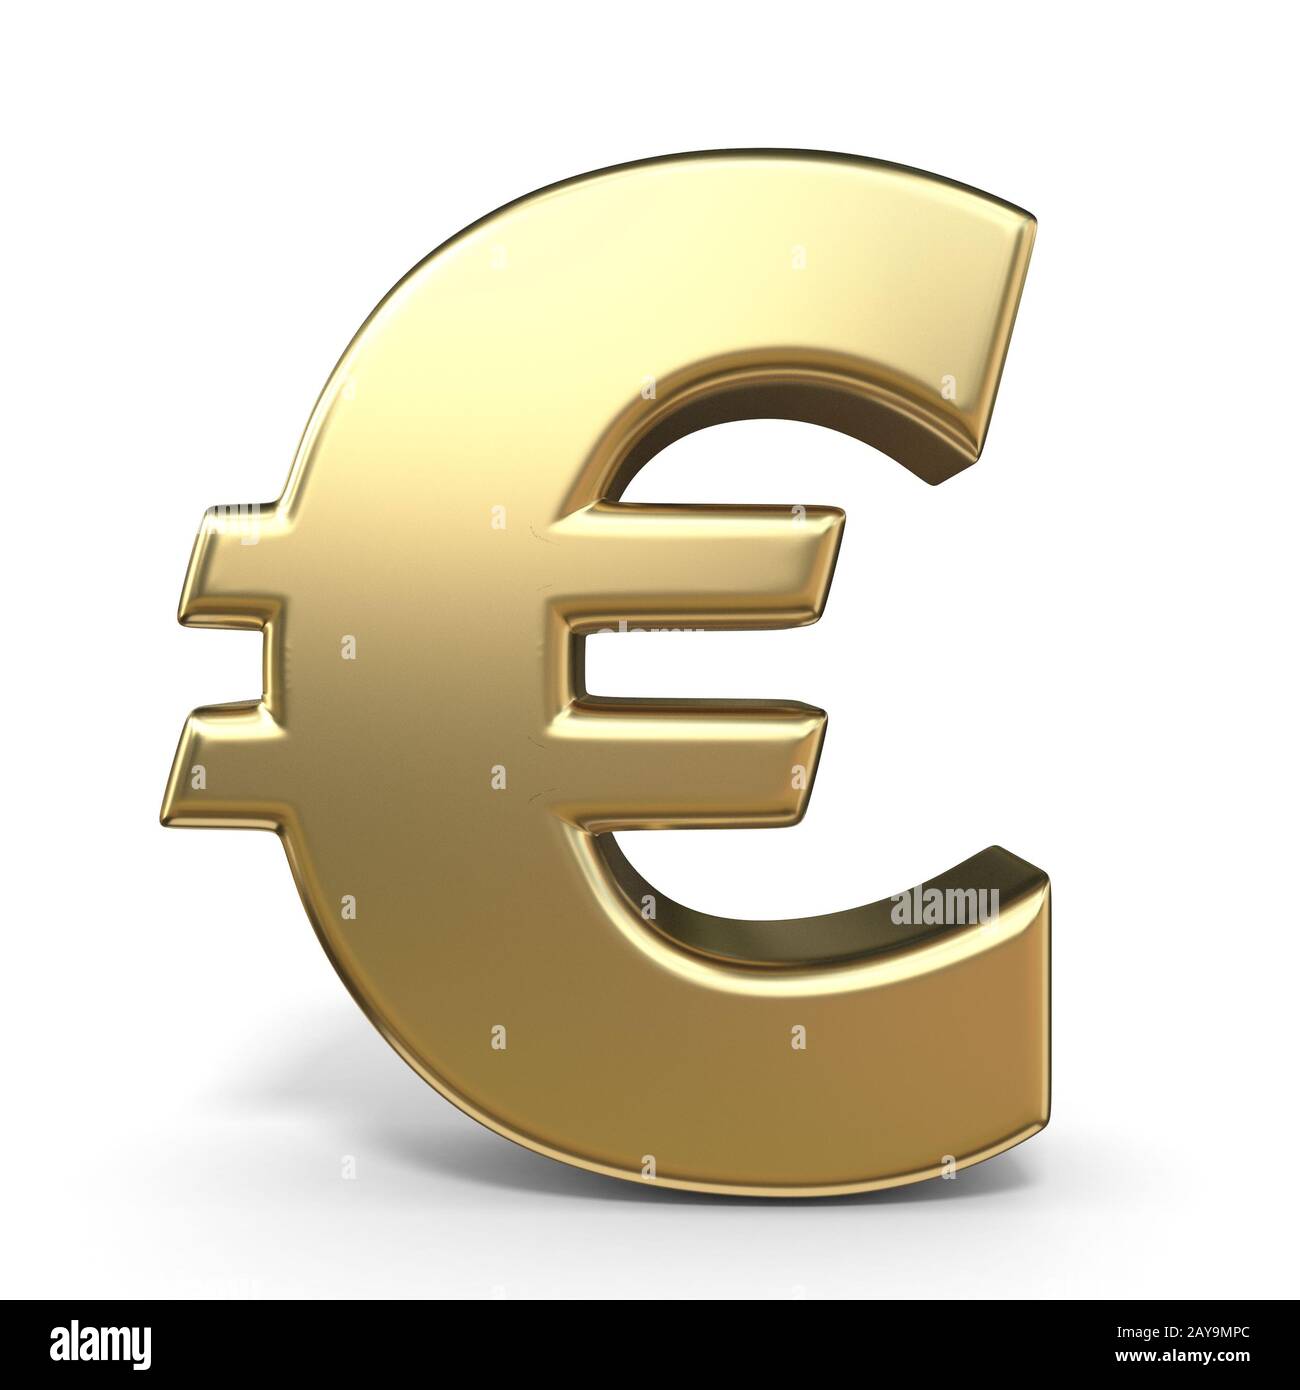 Golden currency symbol EURO 3D Stock Photo